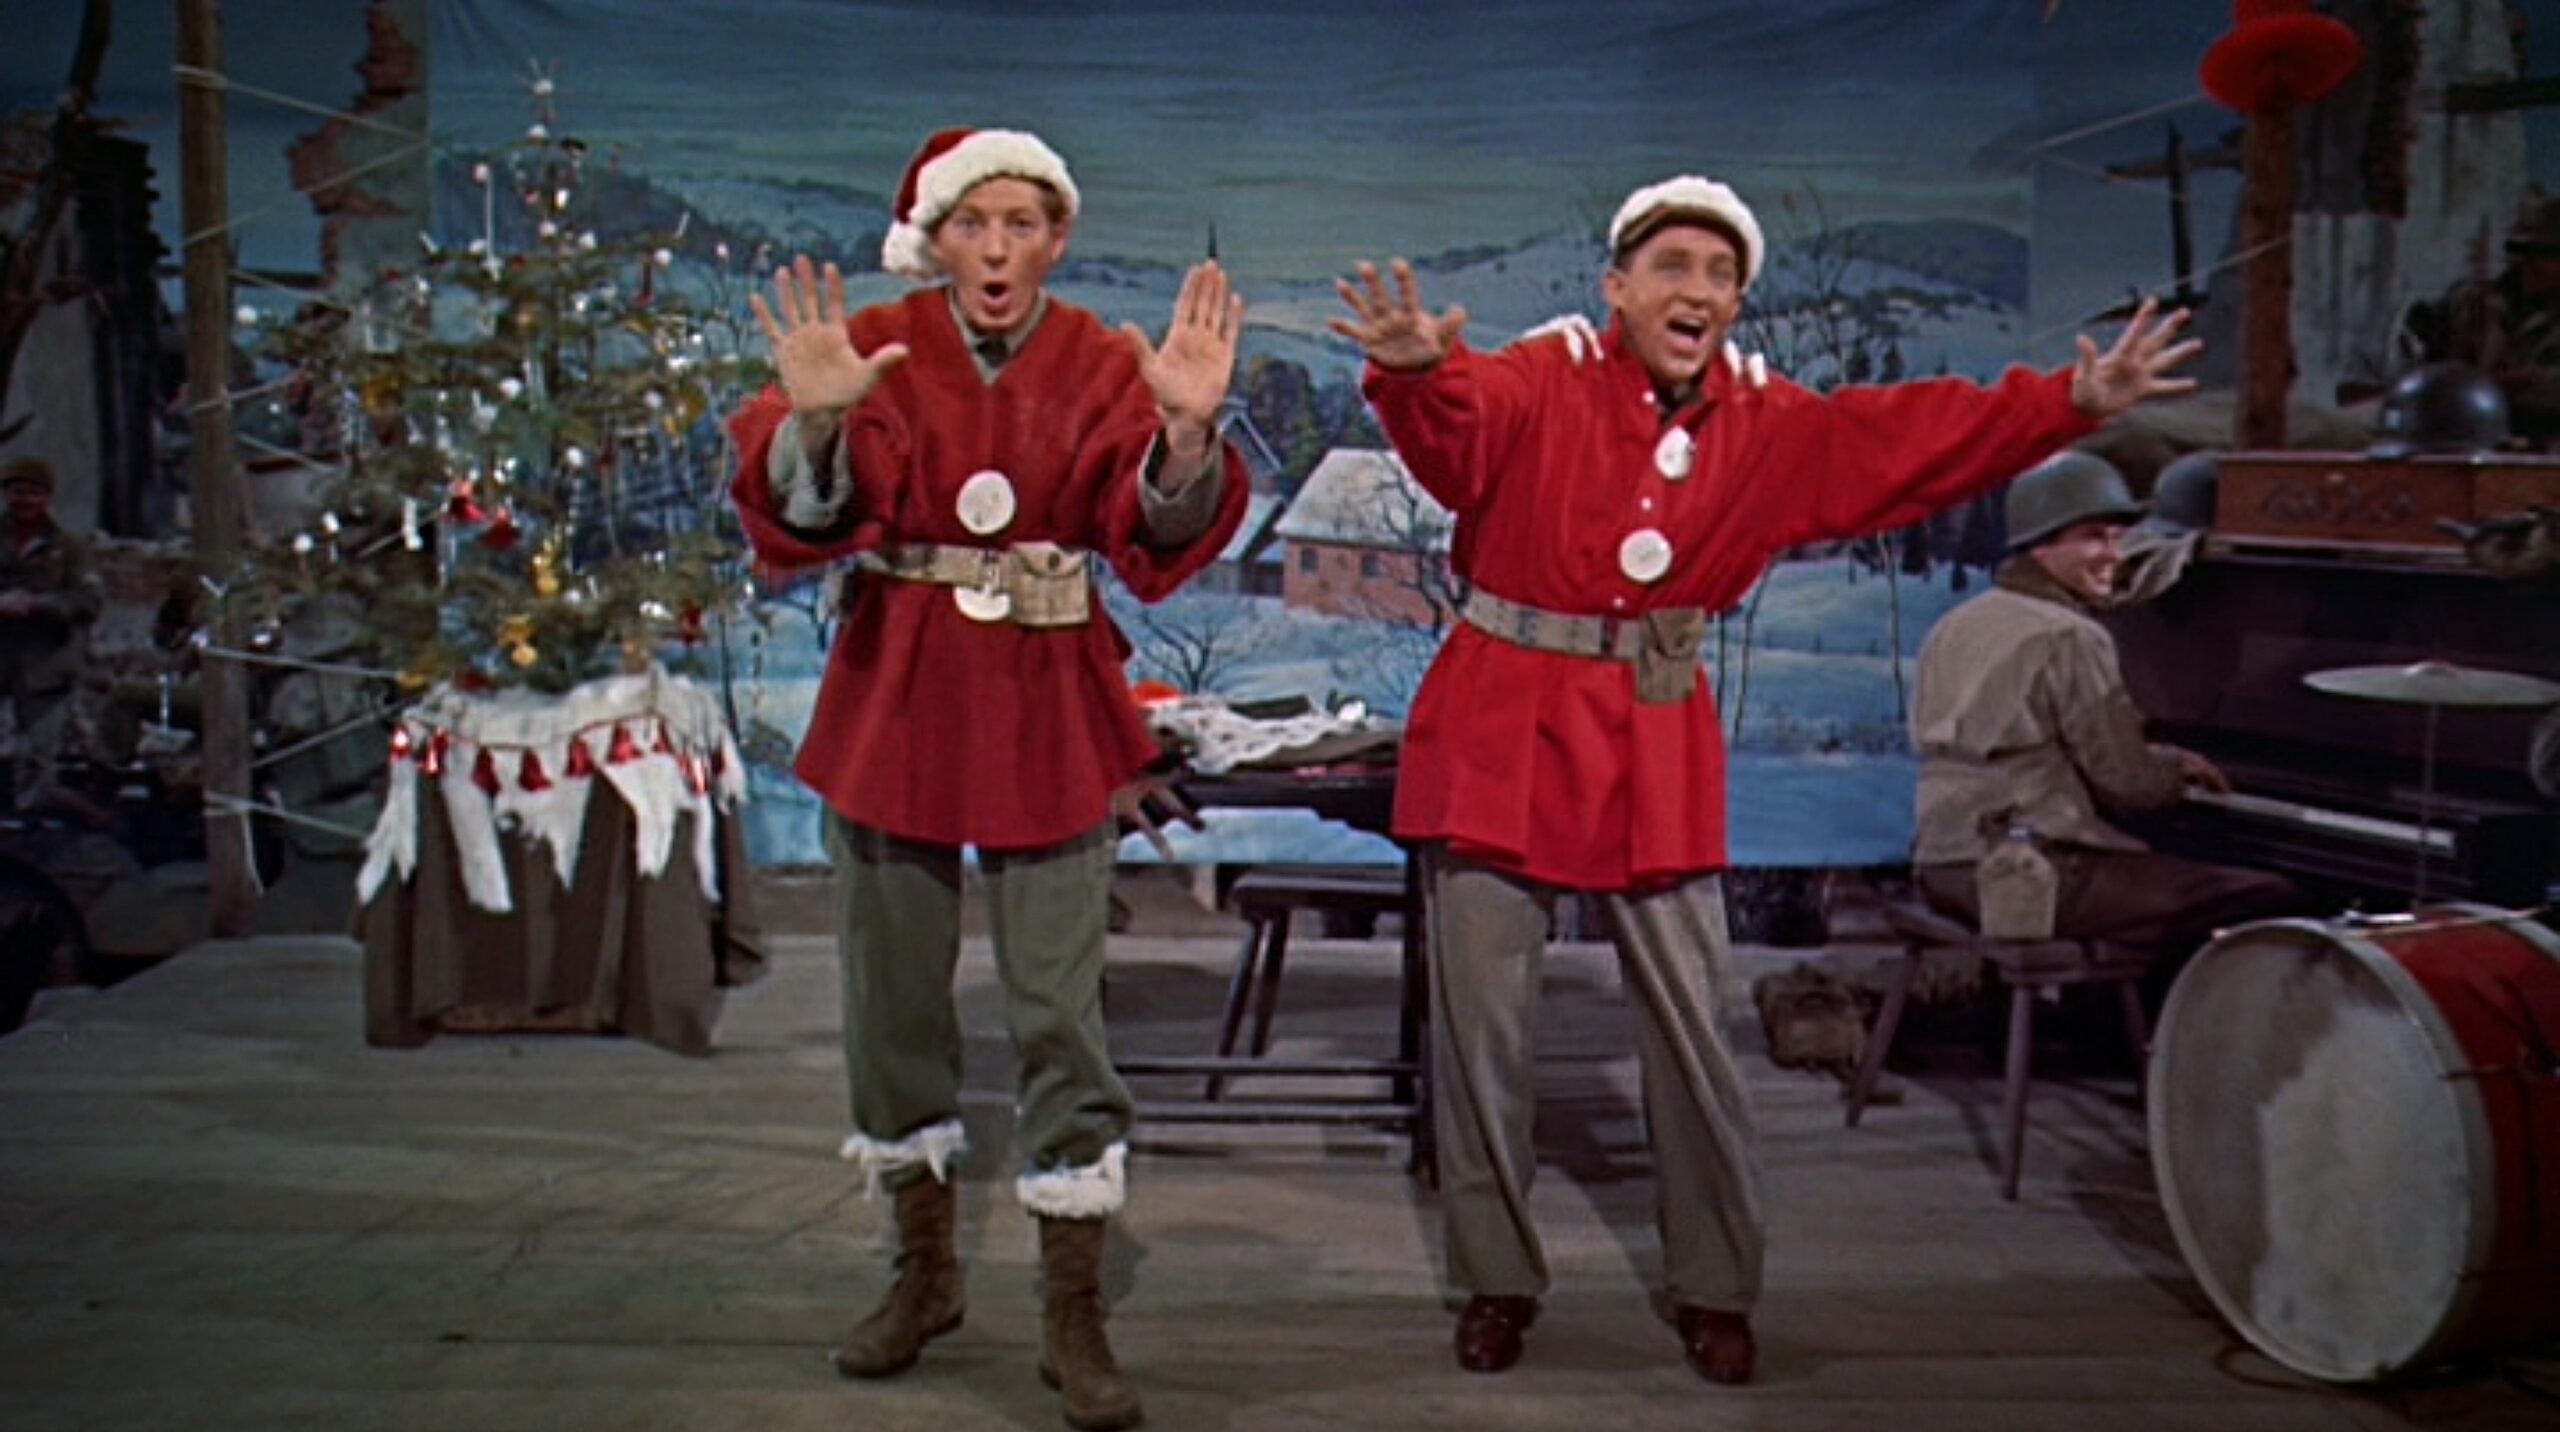 in what movie does the song white christmas first appear